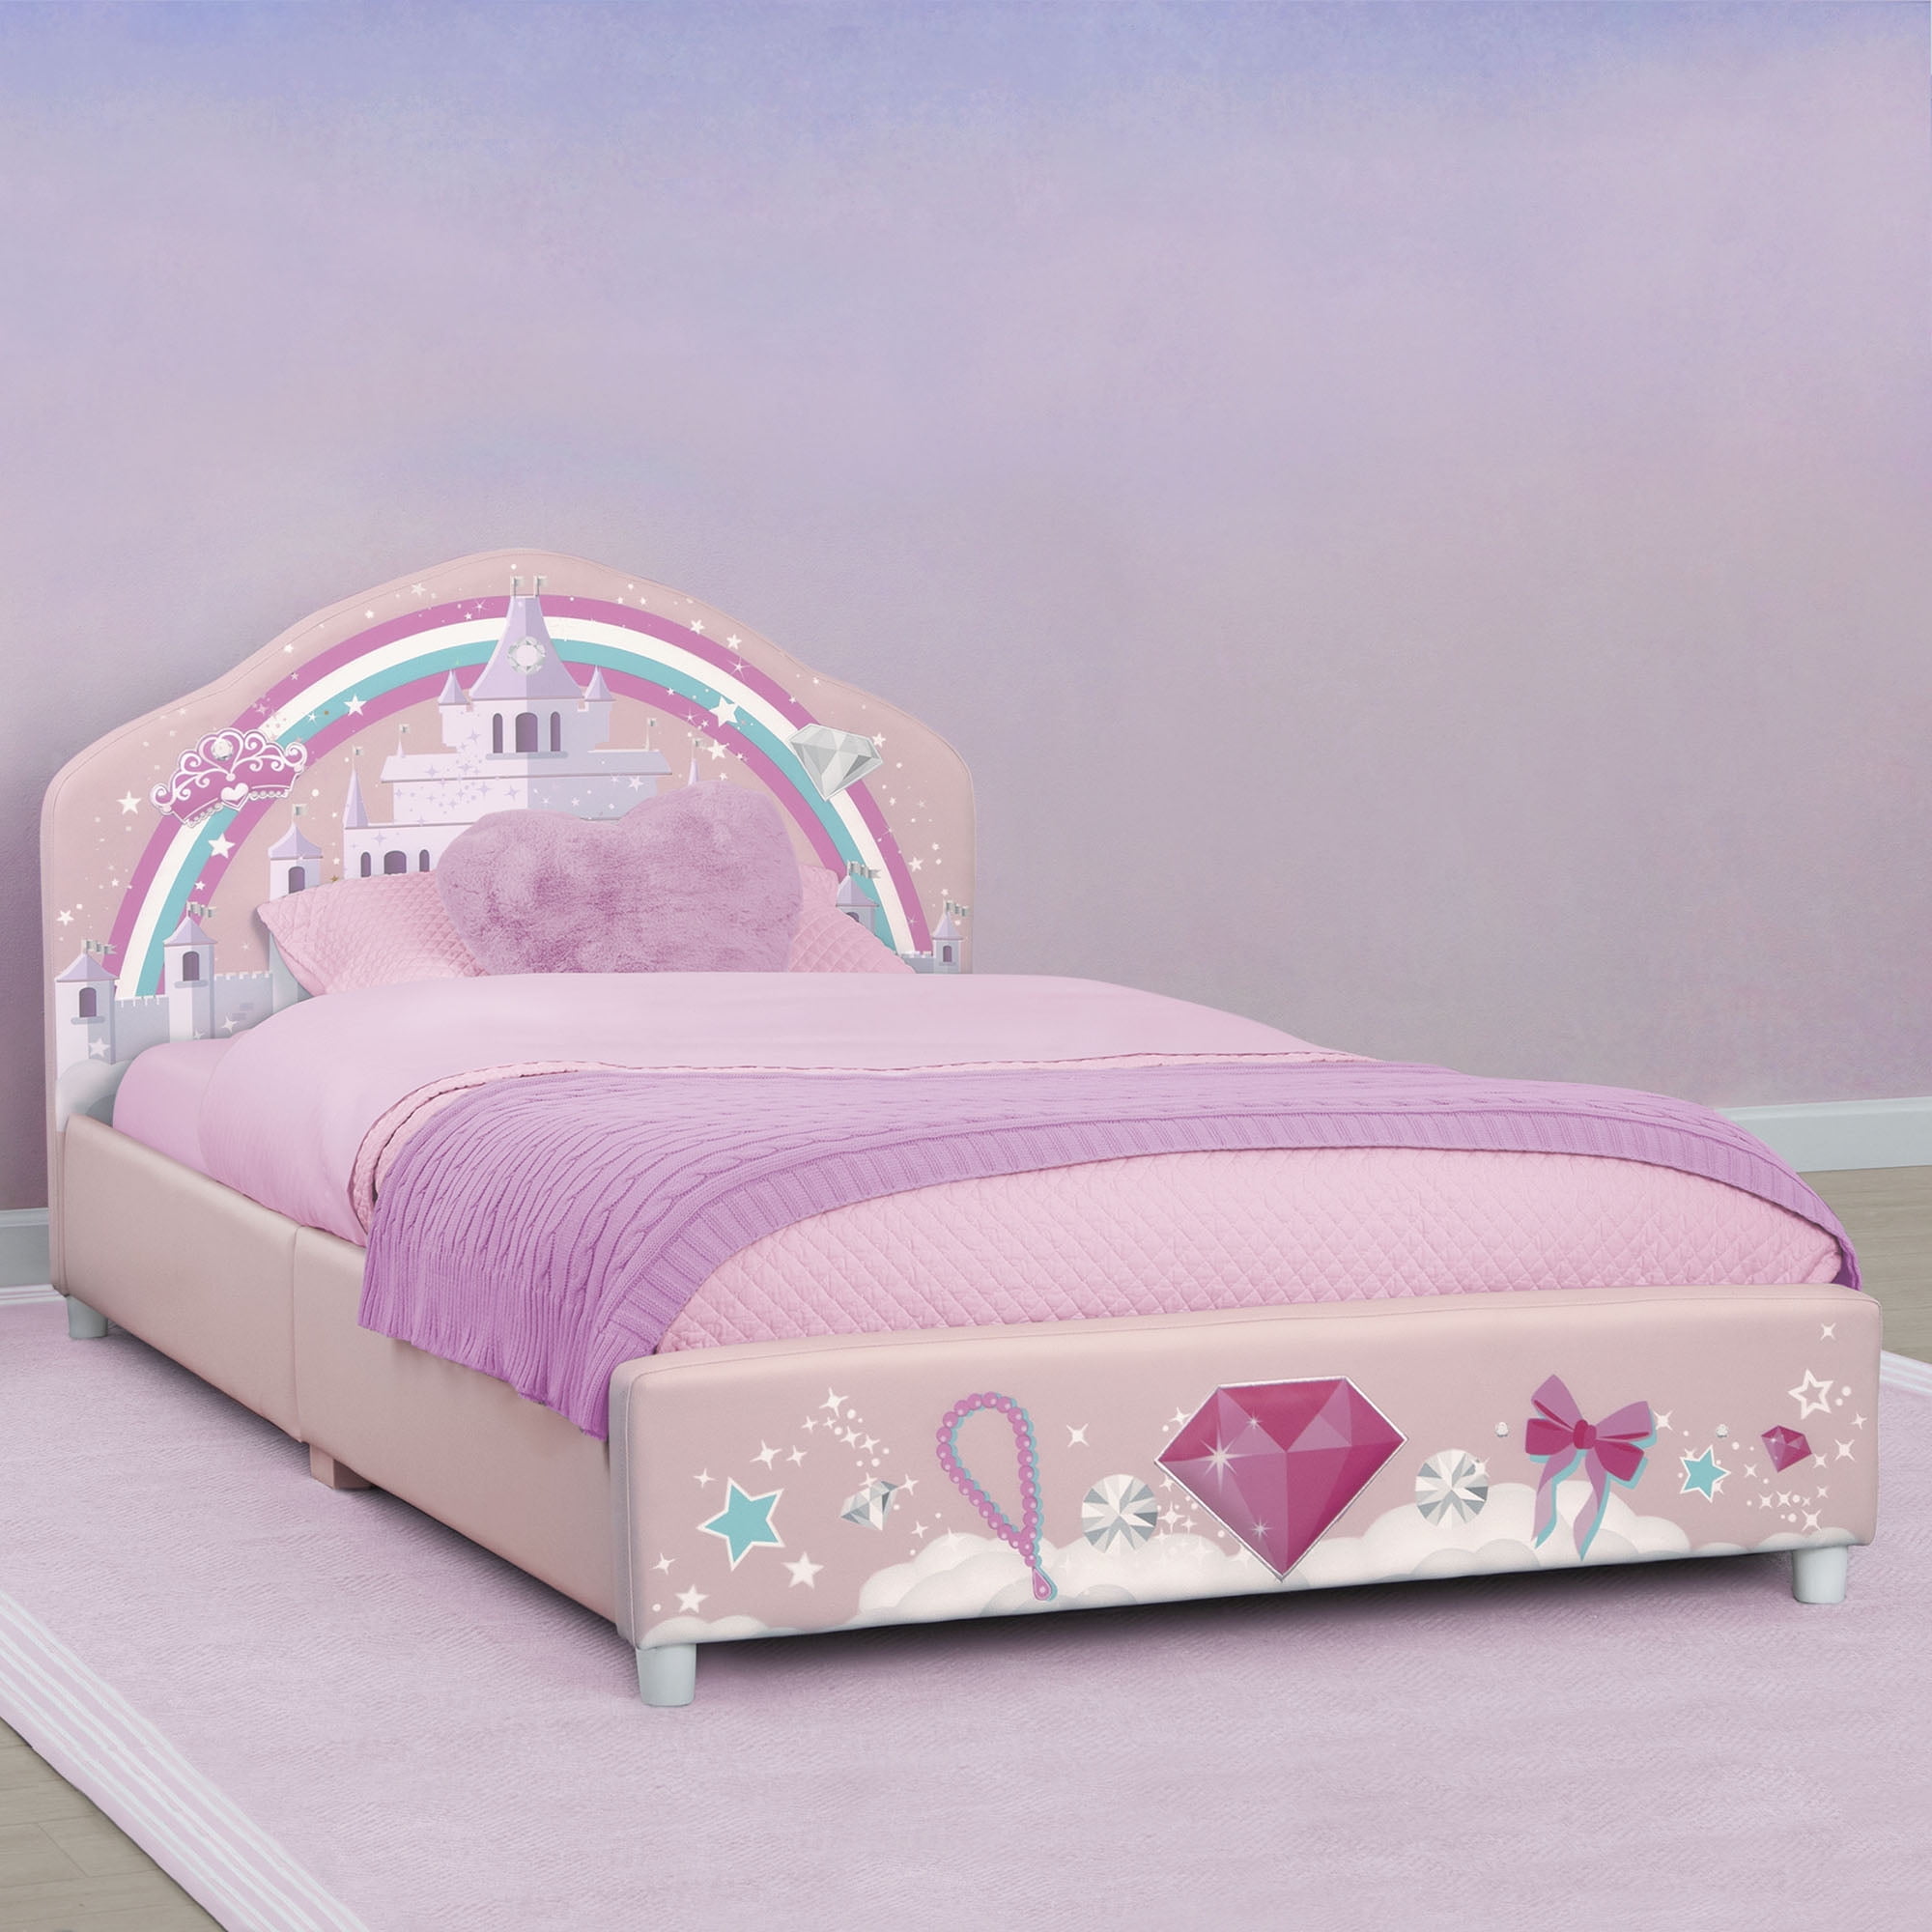 Delta Children Princess Upholstered, Kids Twin Bed With Mattress